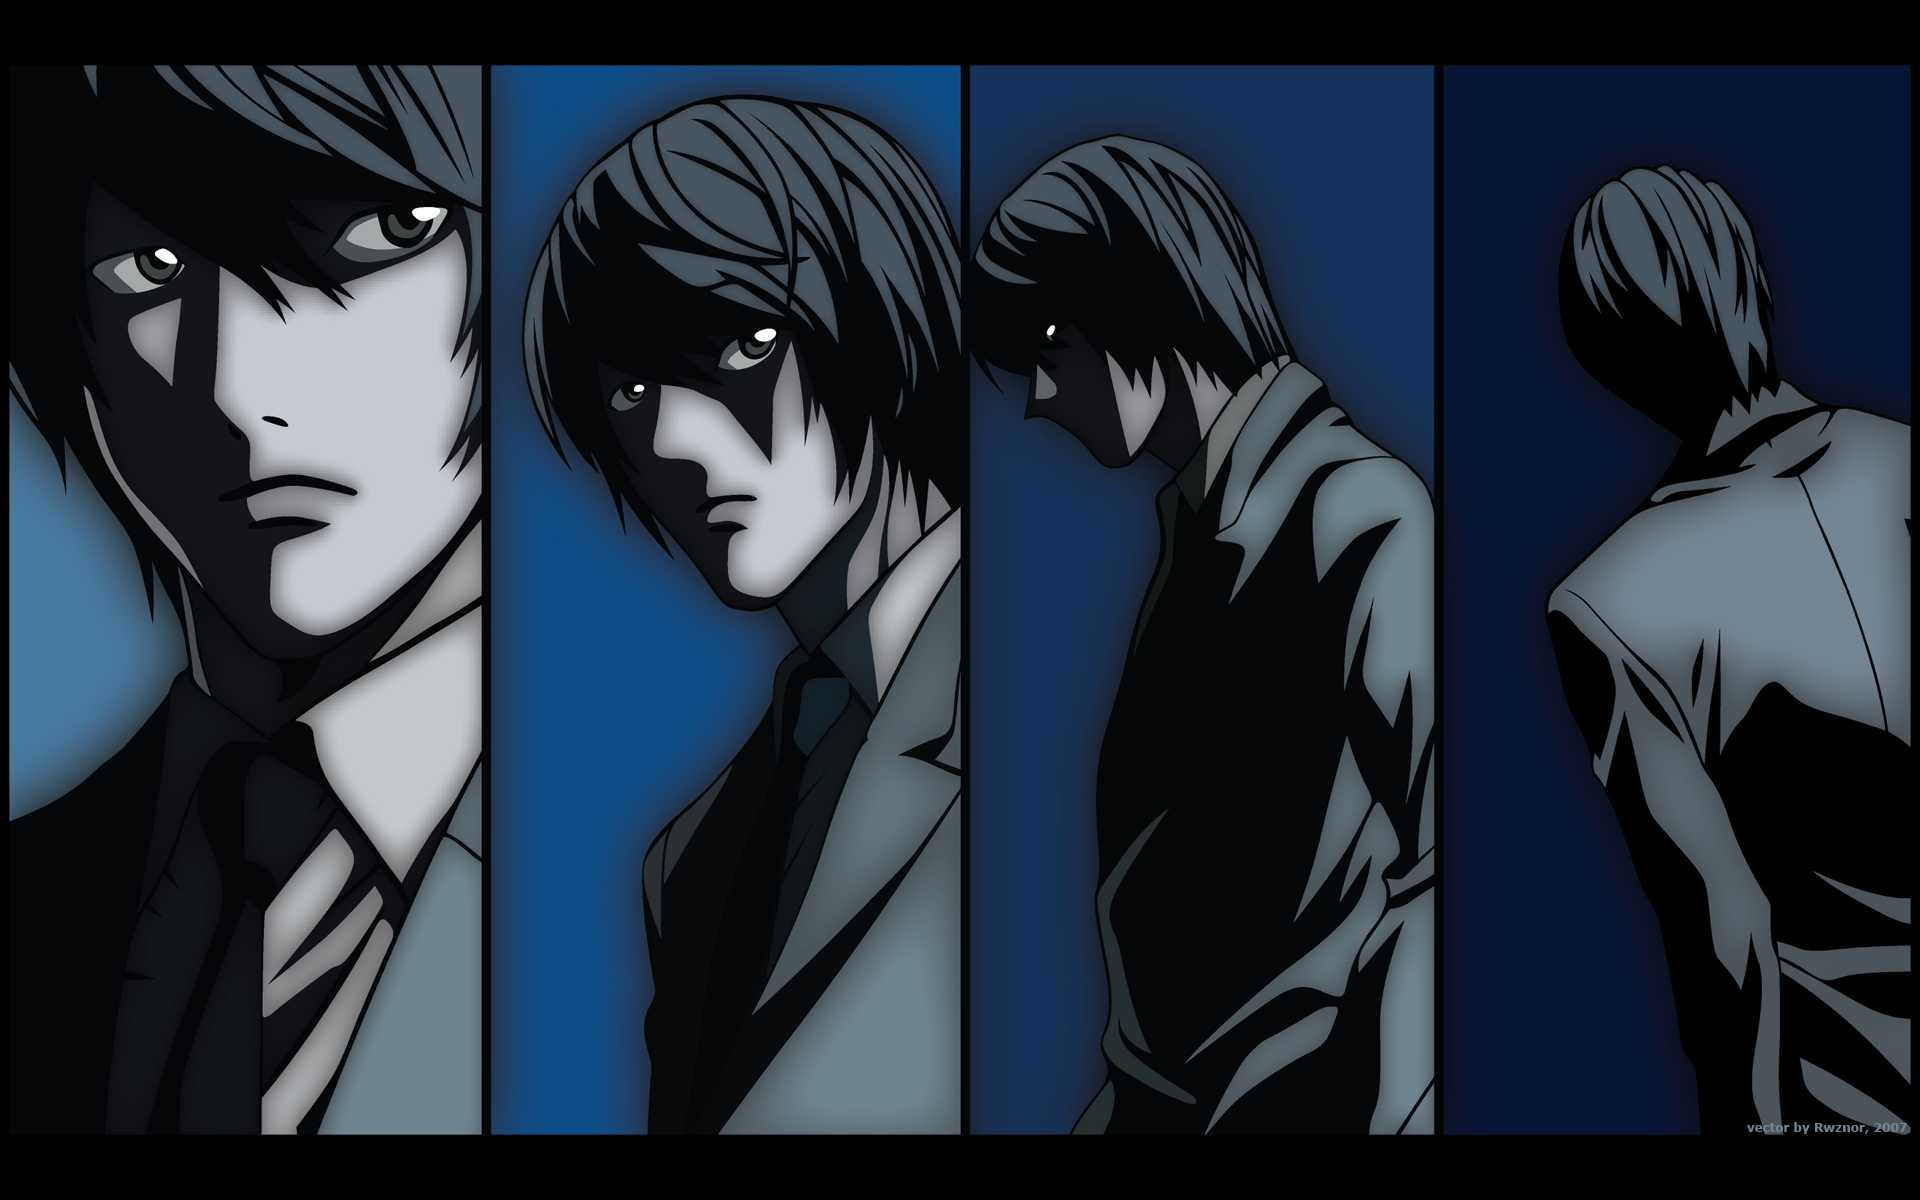 Anime wallpaper featuring the iconic Death Note, perfect for fans and enthusiasts.